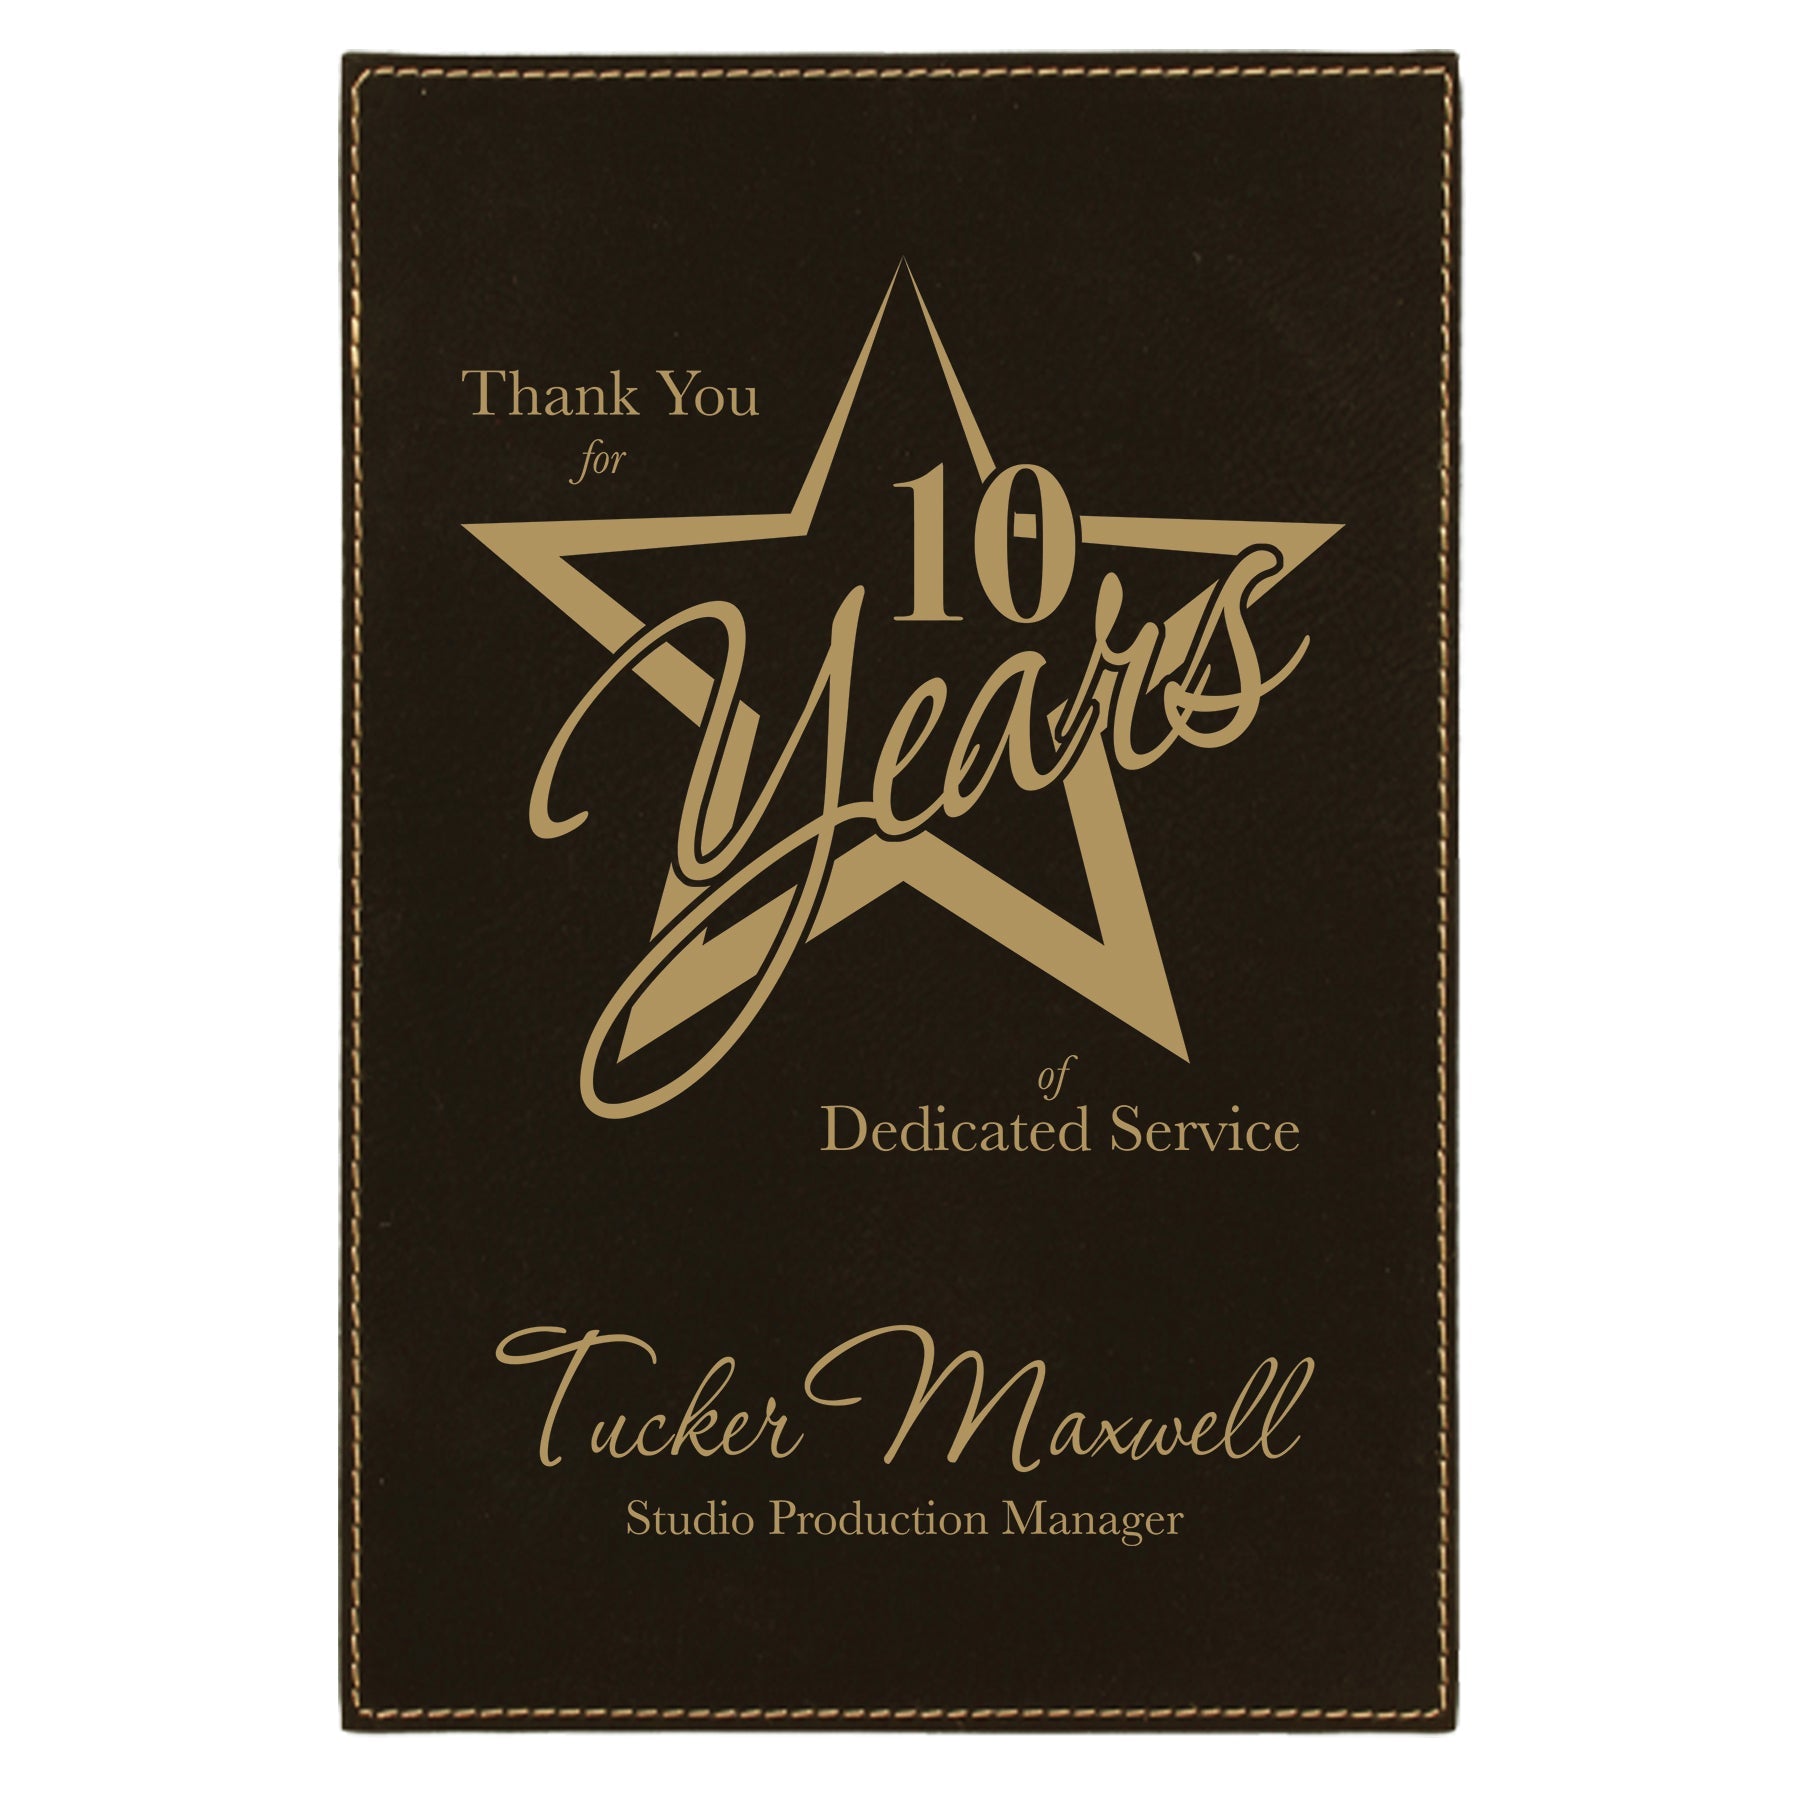 Plaque Plate, Laserable Leatherette, 4" x 6", Laser Engraved Plaque Plate Craftworks NW Black/Gold 